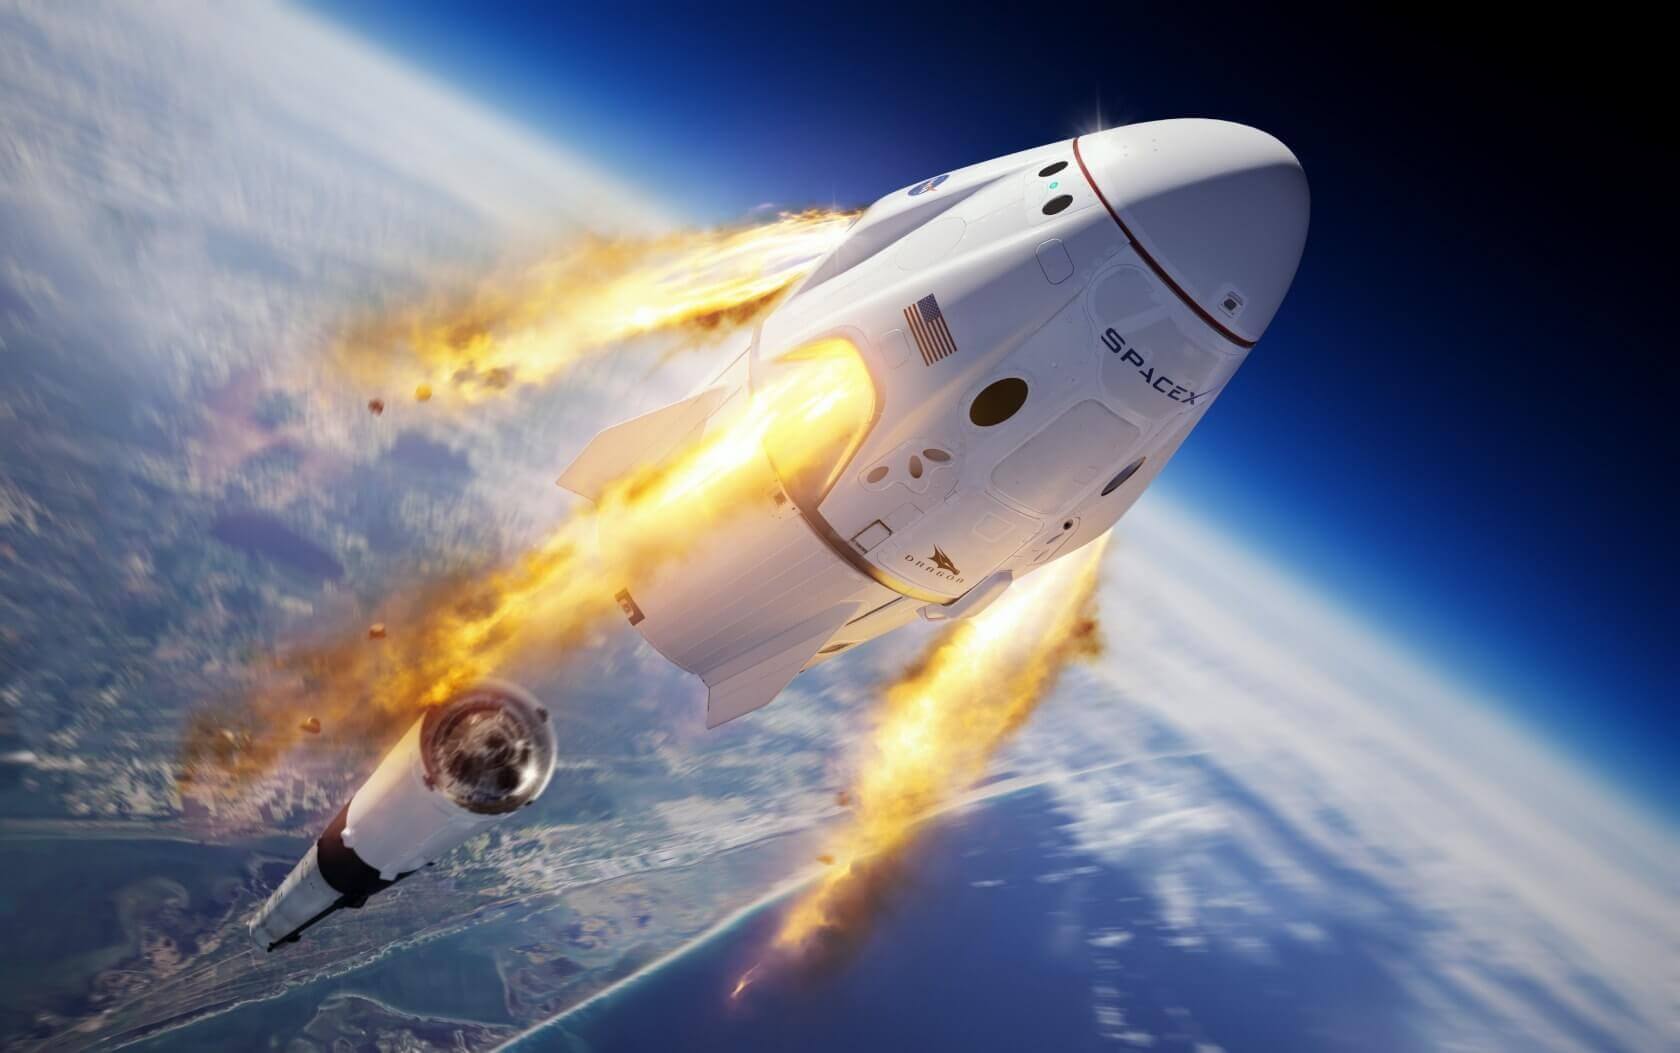 SpaceX's first crewed flight to the ISS will take place on May 27